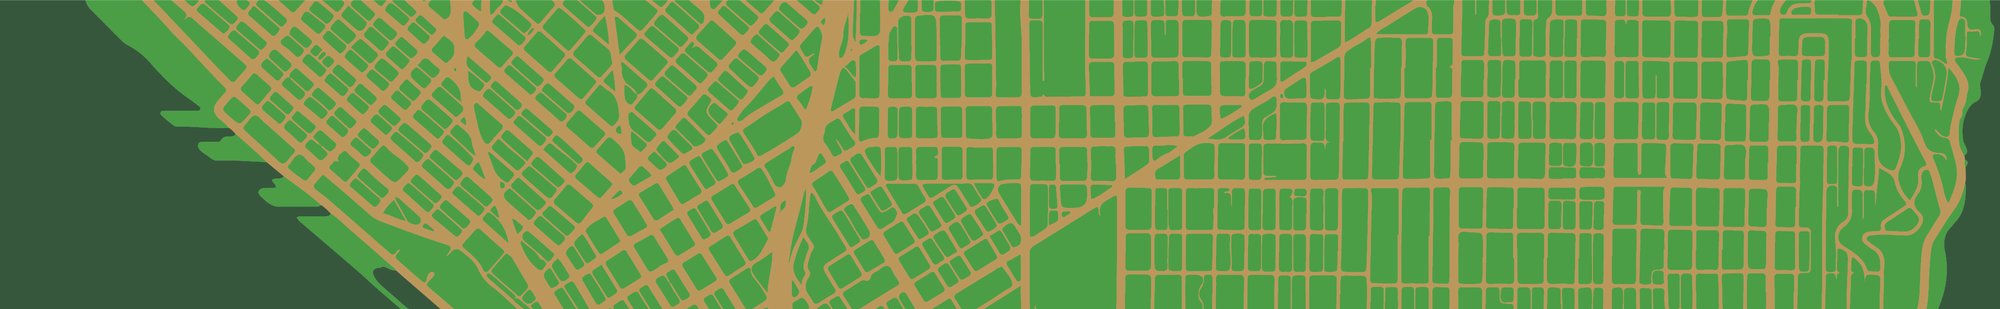 Long Hammer Product Locator on green city map background